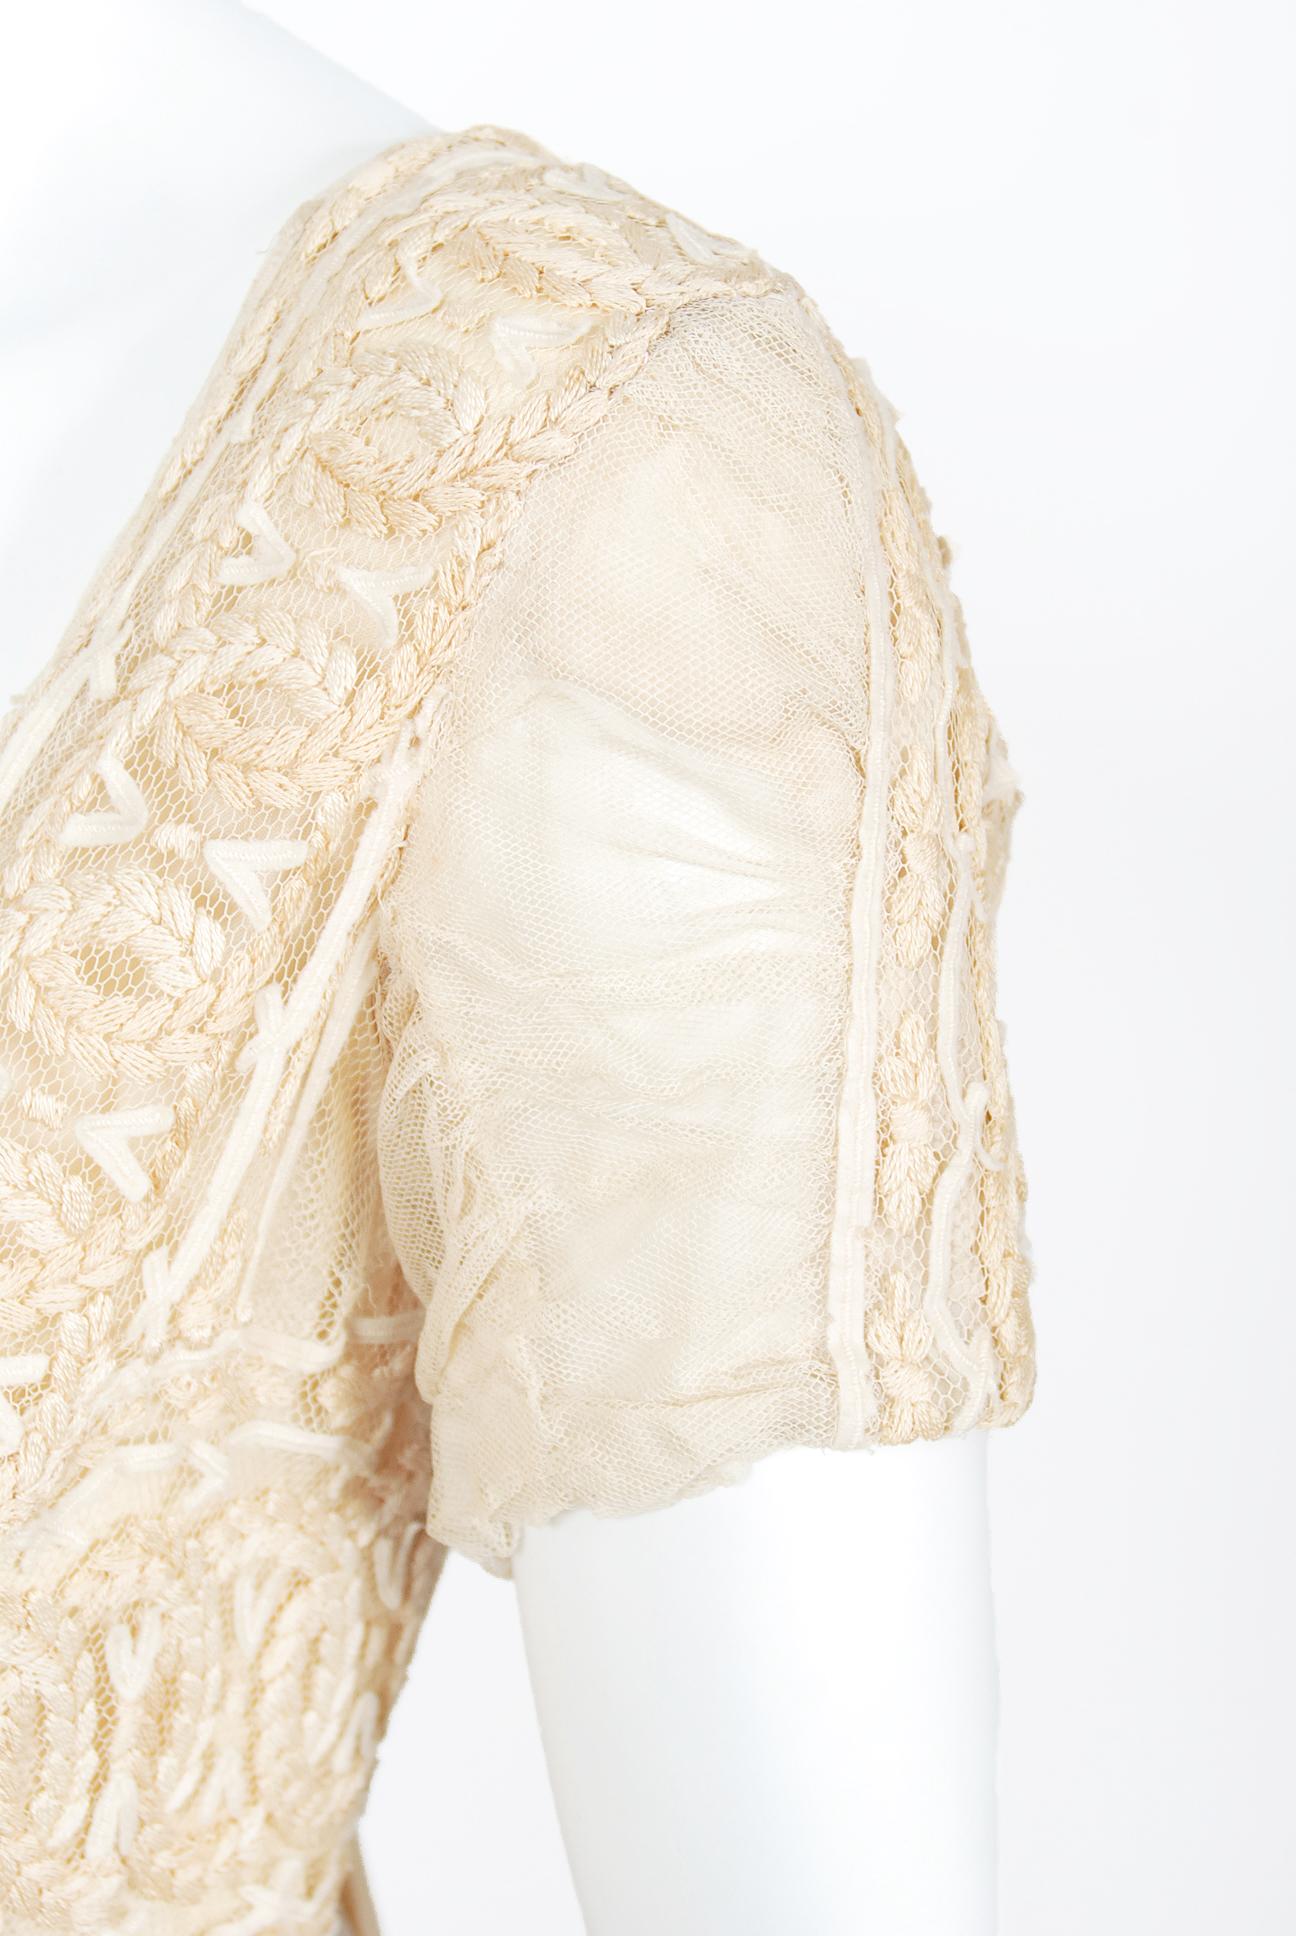 Women's Vintage 1910s Ivory Crème Embroidered Net-Lace & Silk Satin Trained Bridal Gown  For Sale